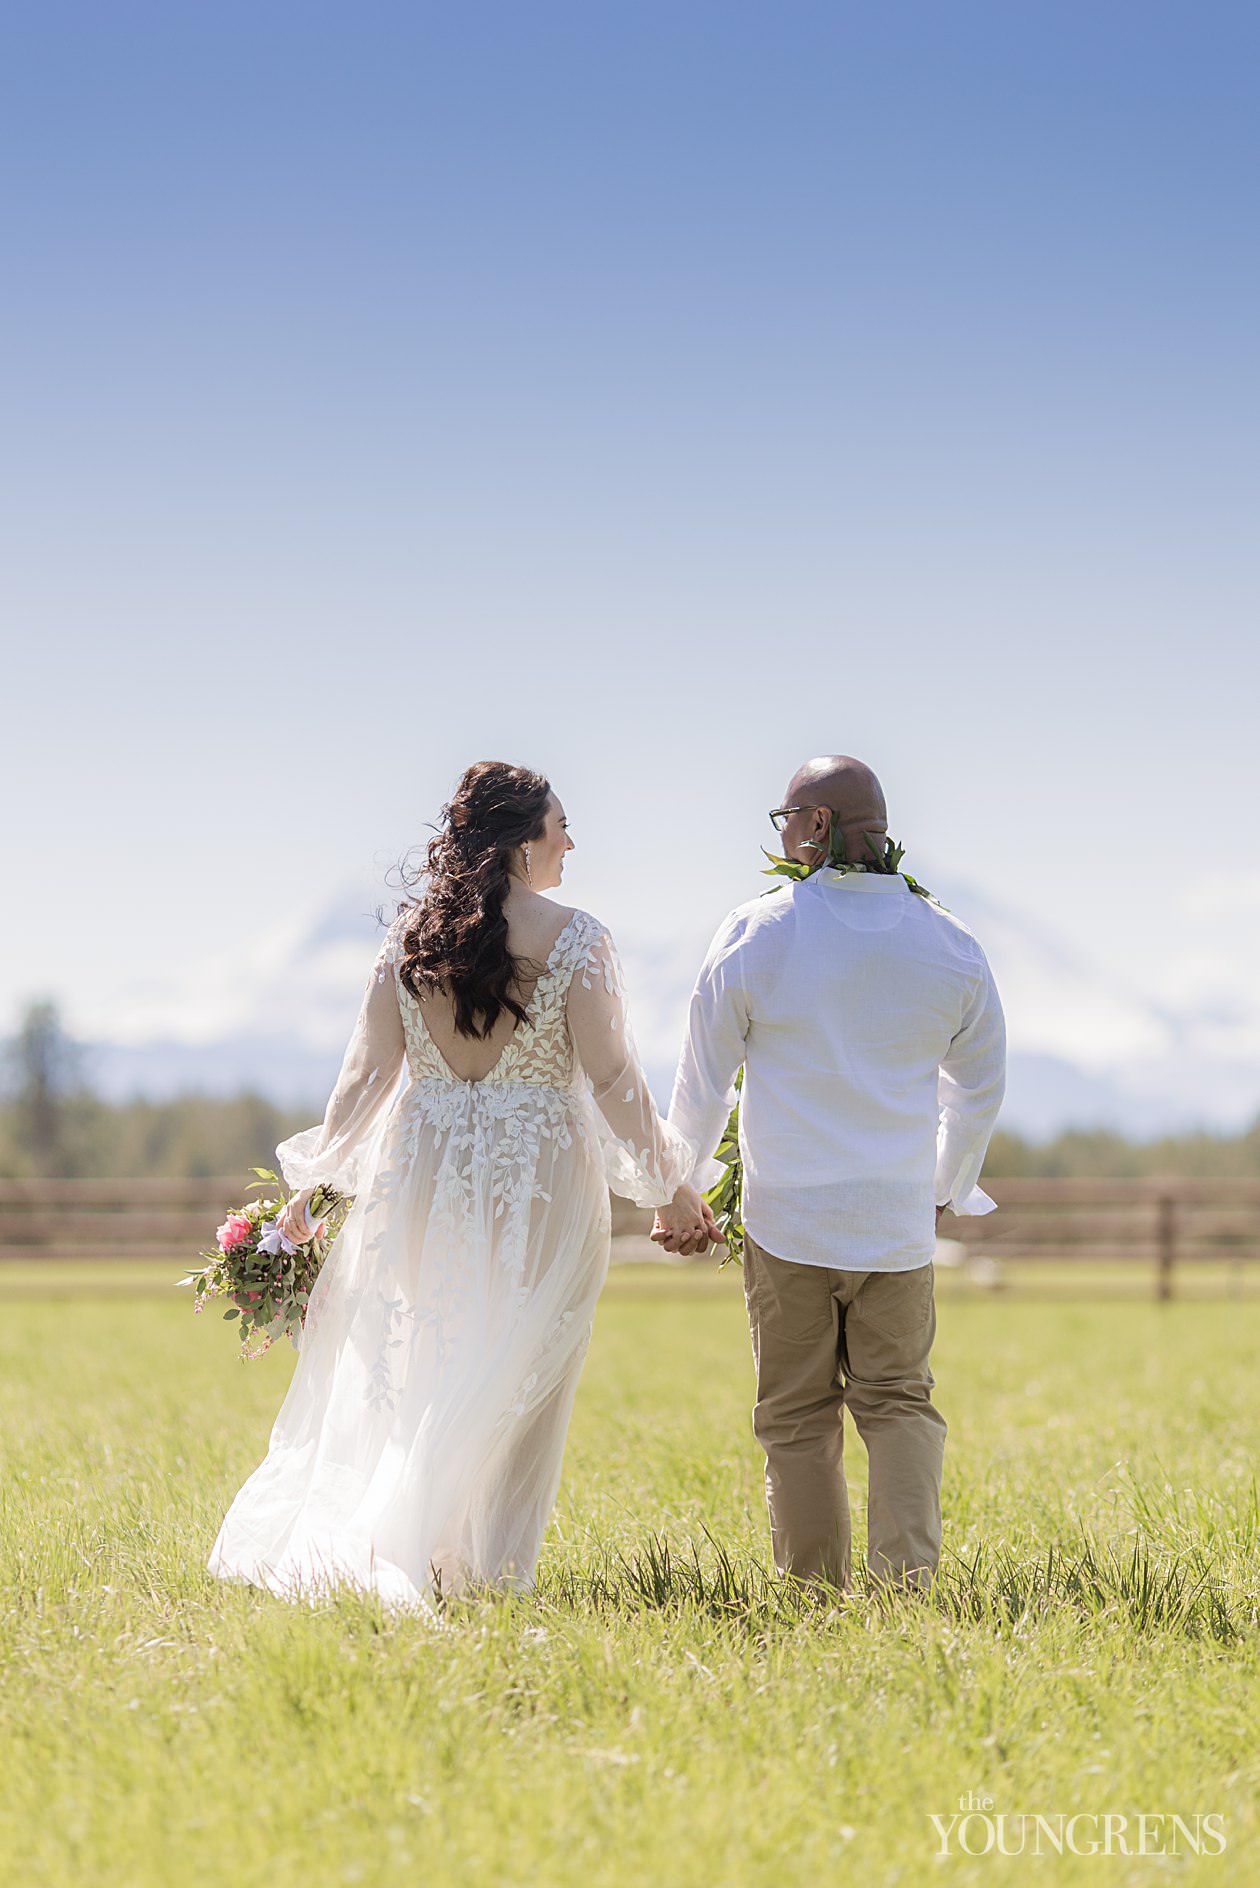 Bend Private Estate Wedding, private estate elopement, covid wedding, intimate wedding in bend, bend oregon wedding, bend wedding photographer, oregon wedding photographer, bend photographer, mountain wedding, married photography team